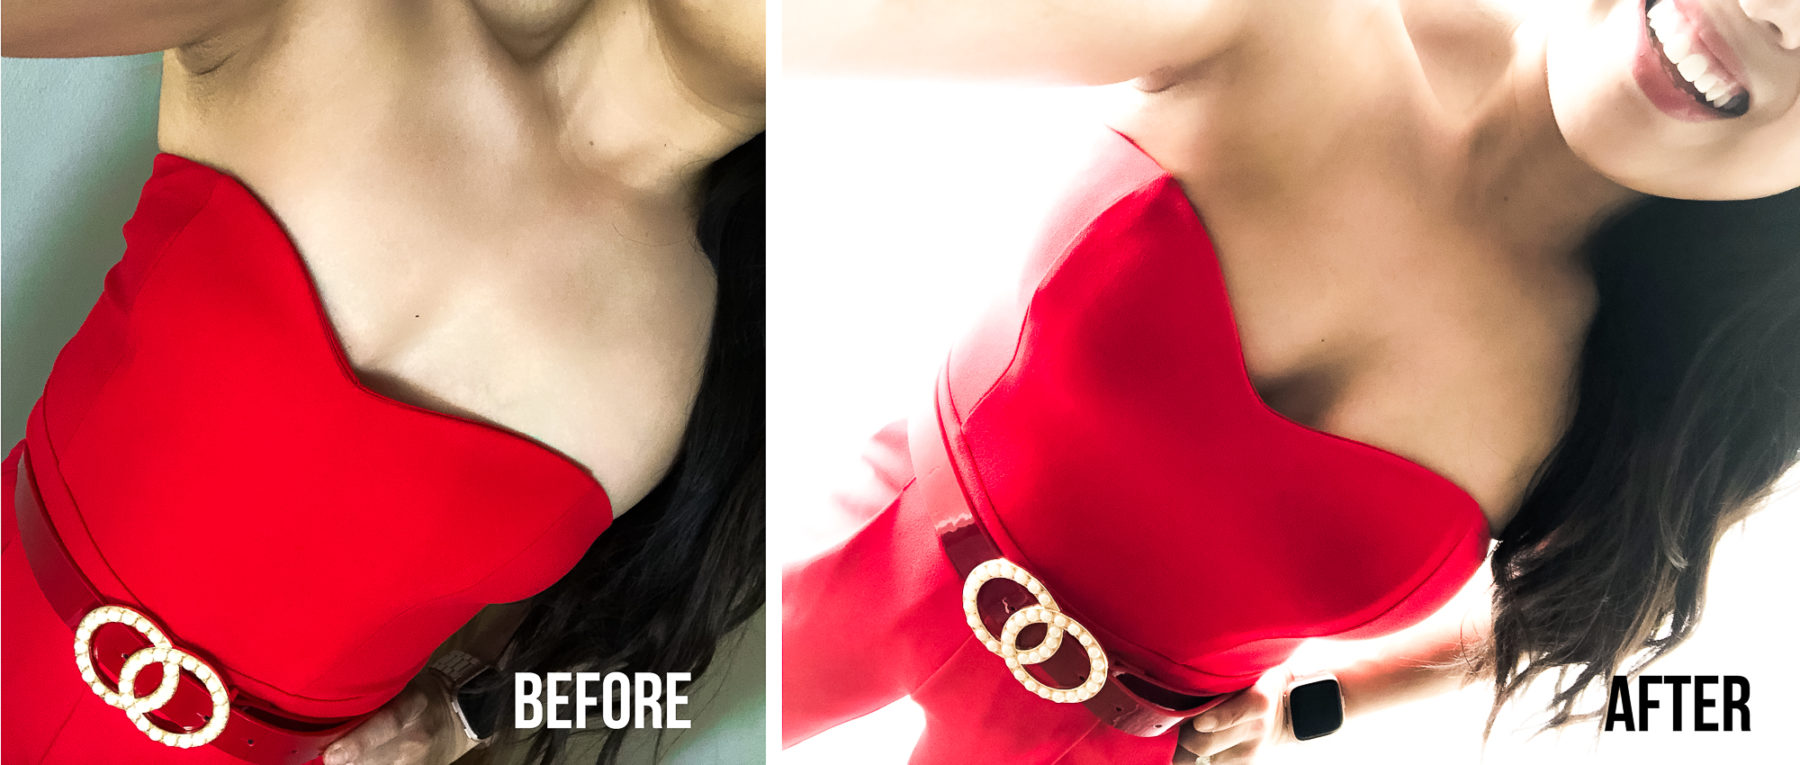 cute & little | dallas petite fashion blogger | upbra review before after - The Best Bra for Getting Glamorous For Date Night featured by popular Dallas petite fashion blogger, Cute & LIttle